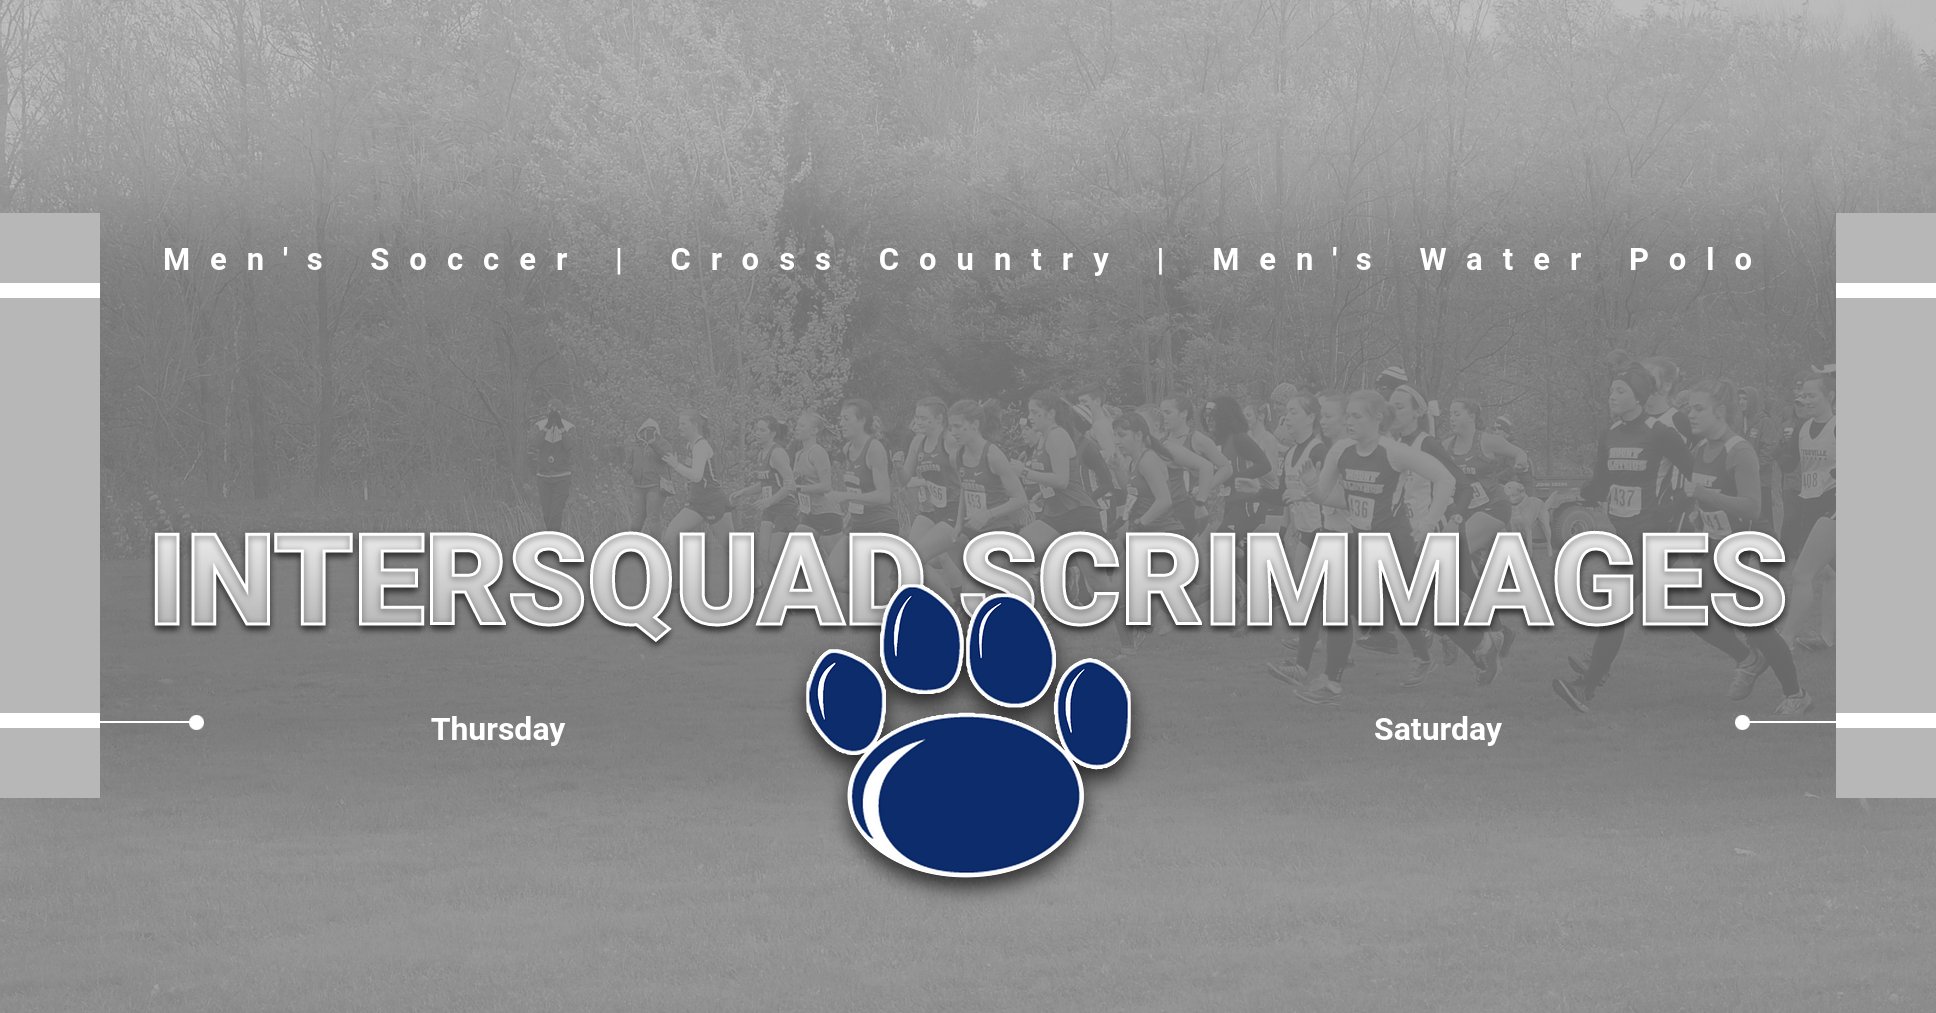 Men's Soccer, Cross Country, Men's Water Polo Intersquad Scrimmages